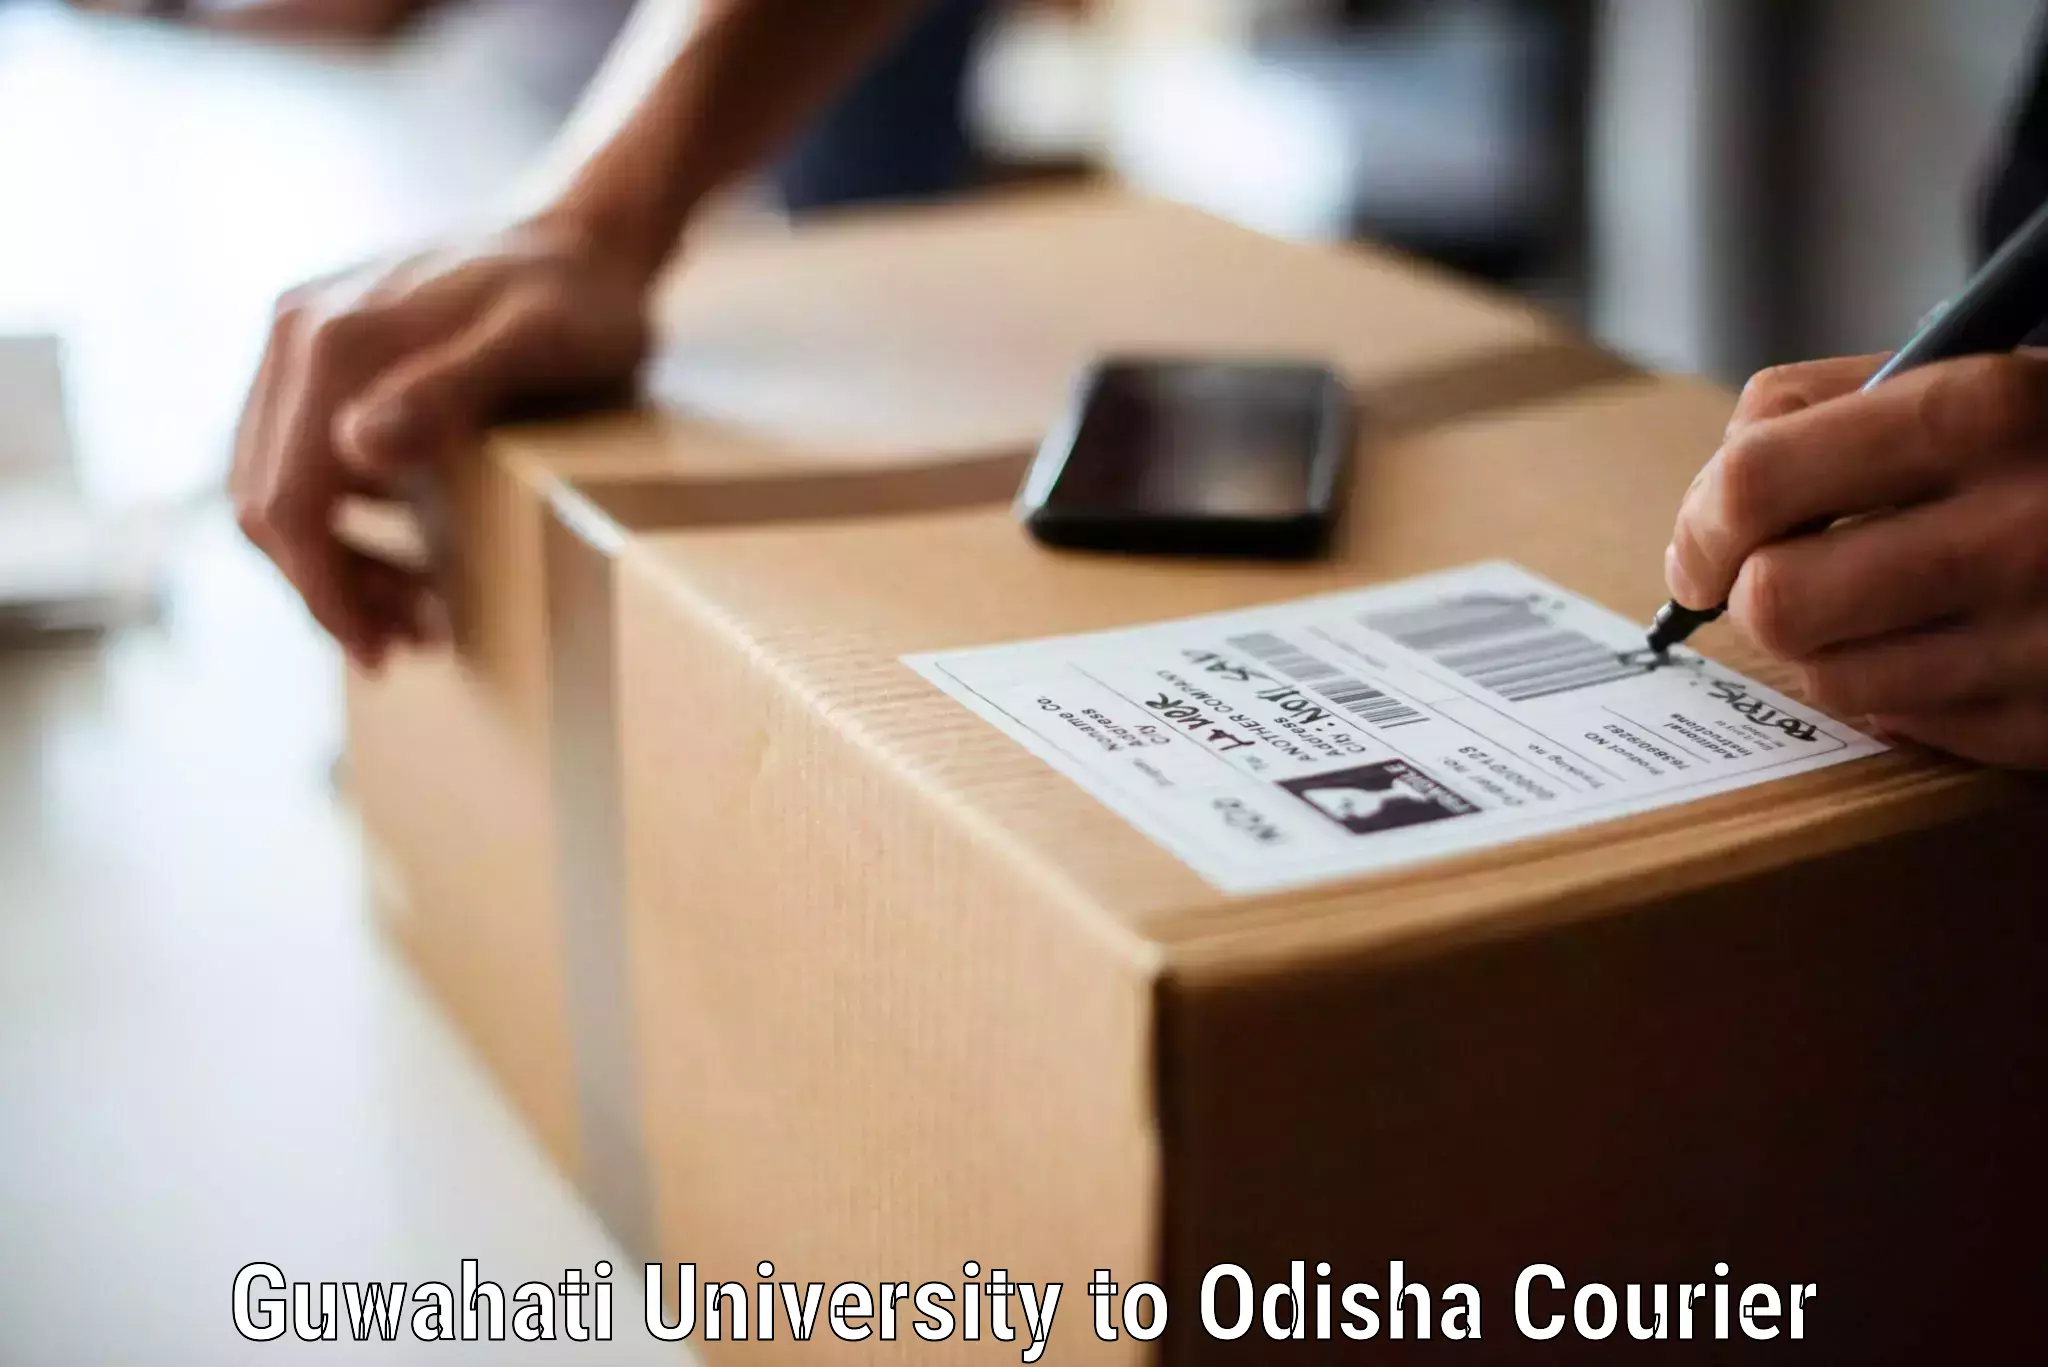 Full-service movers in Guwahati University to Chatrapur